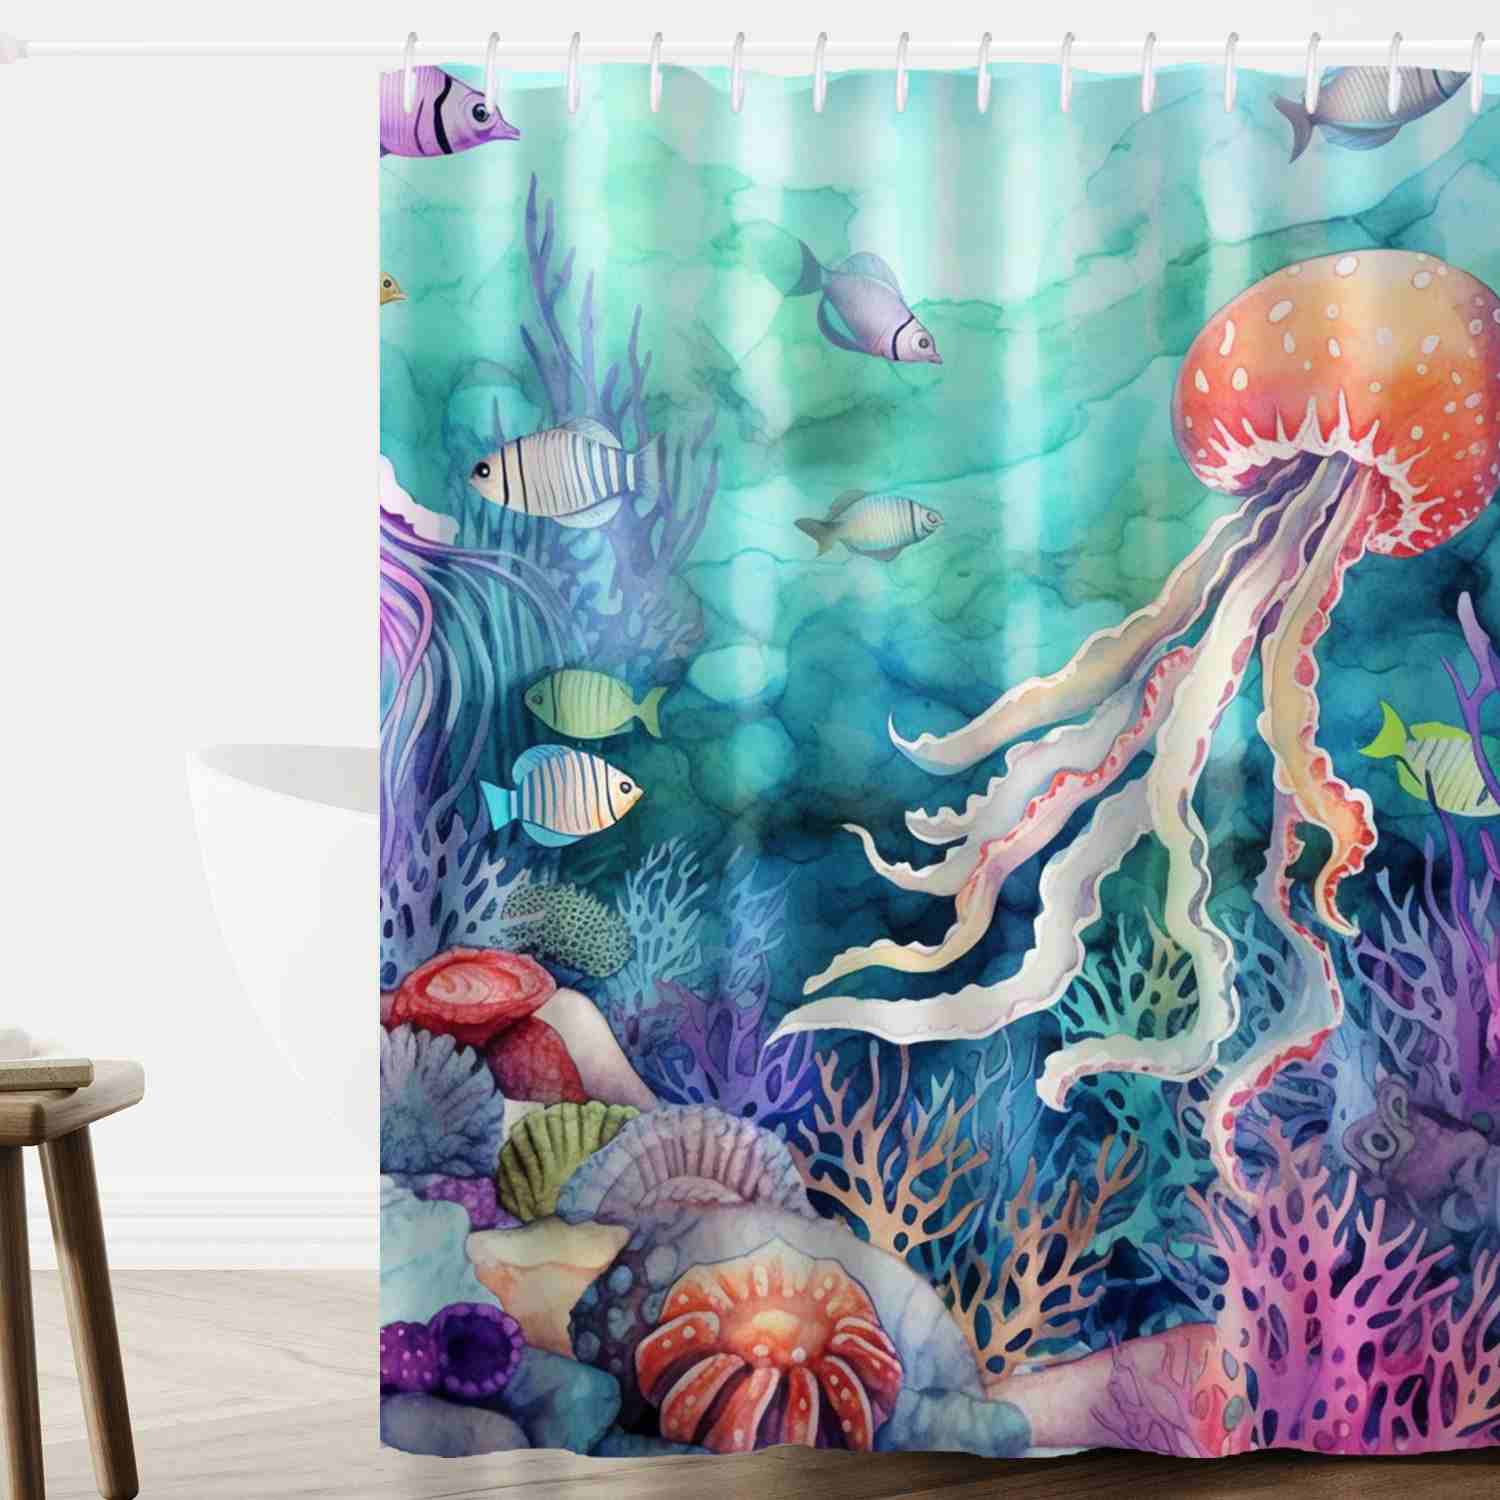 A colorful shower curtain with a jellyfish and other sea creatures.